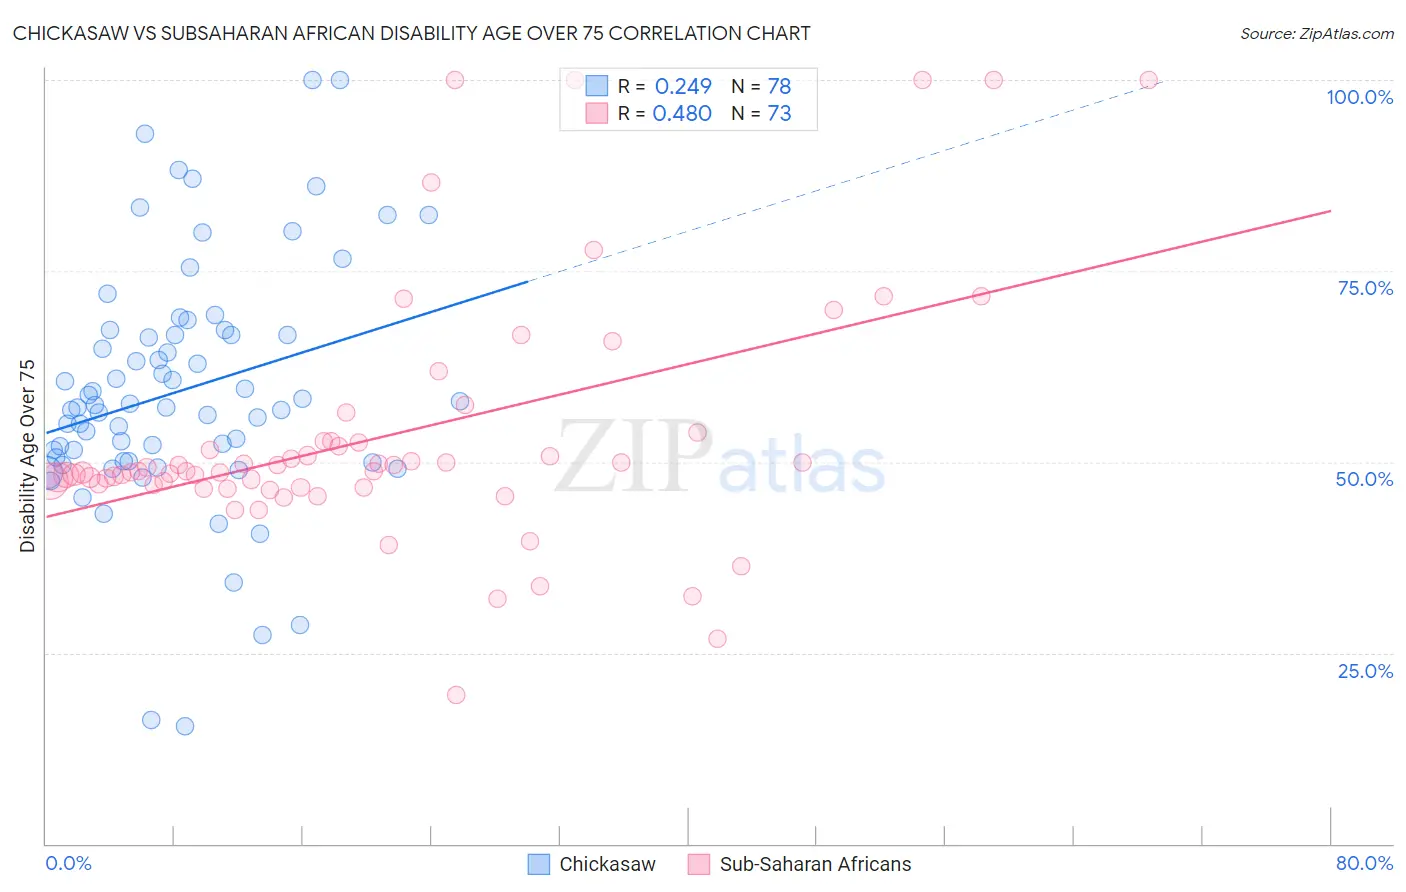 Chickasaw vs Subsaharan African Disability Age Over 75